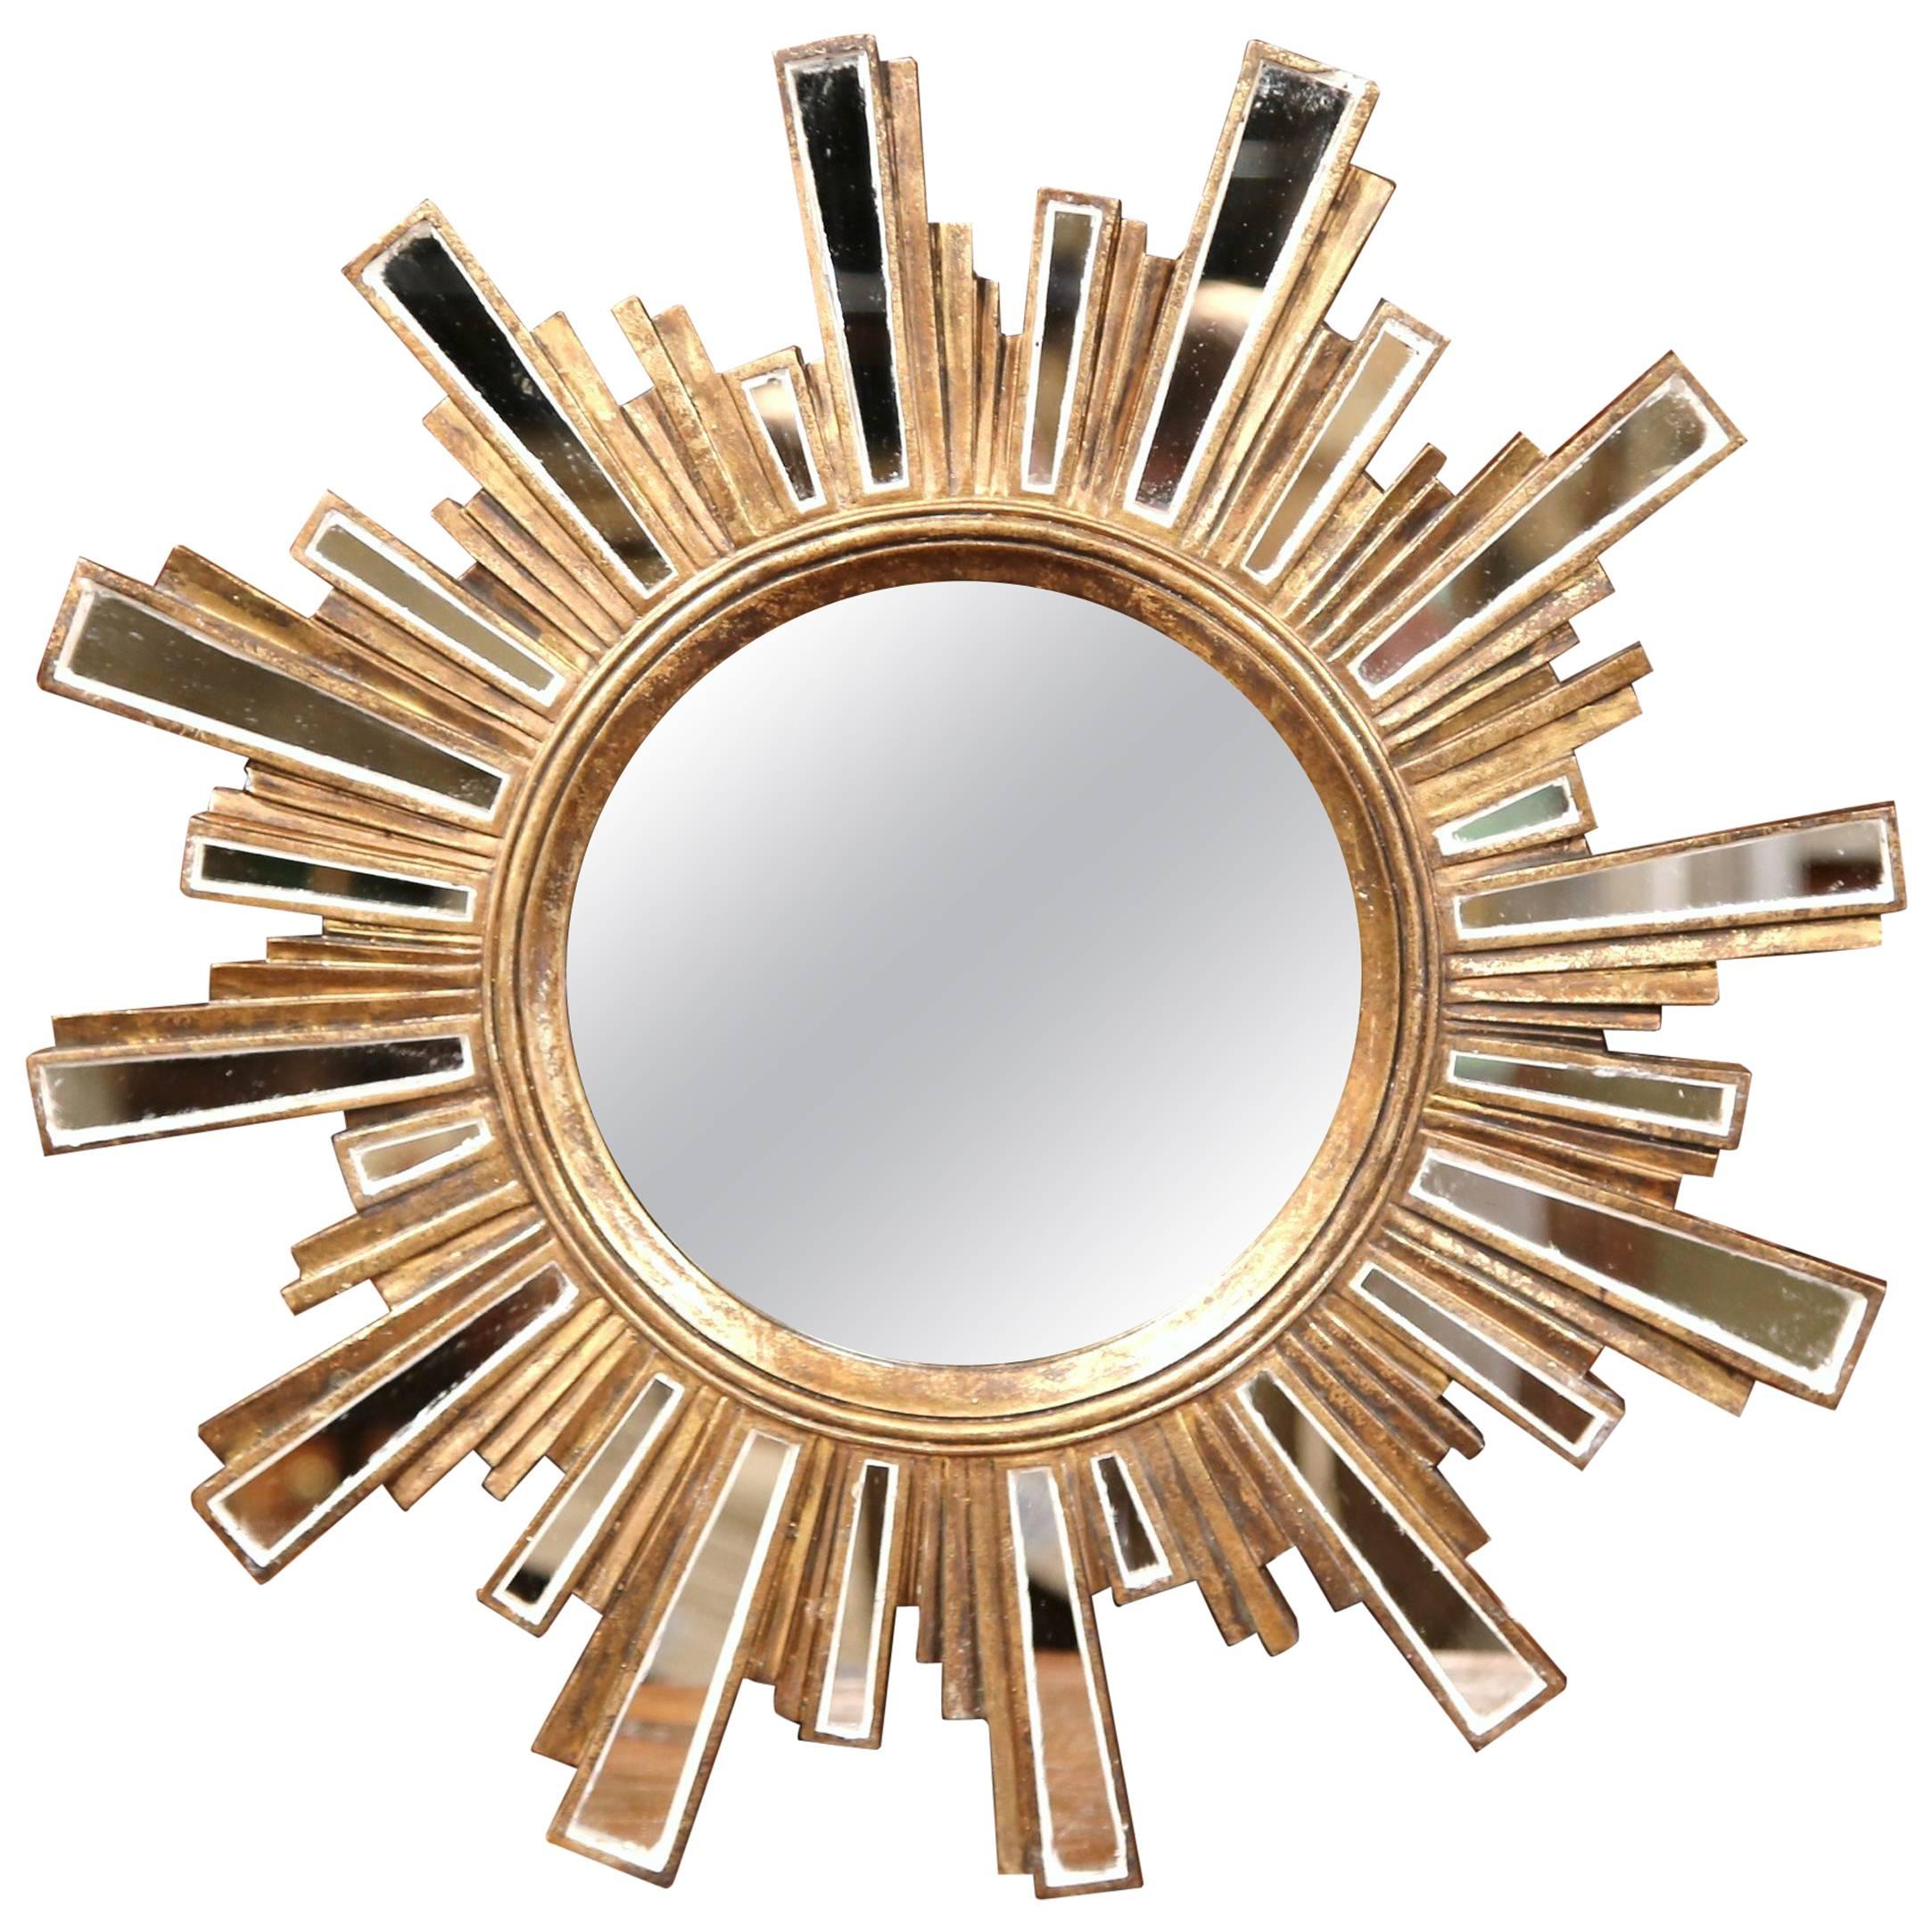 Mid-20th Century French Giltwood Sunbust Mirror with Glass Beams